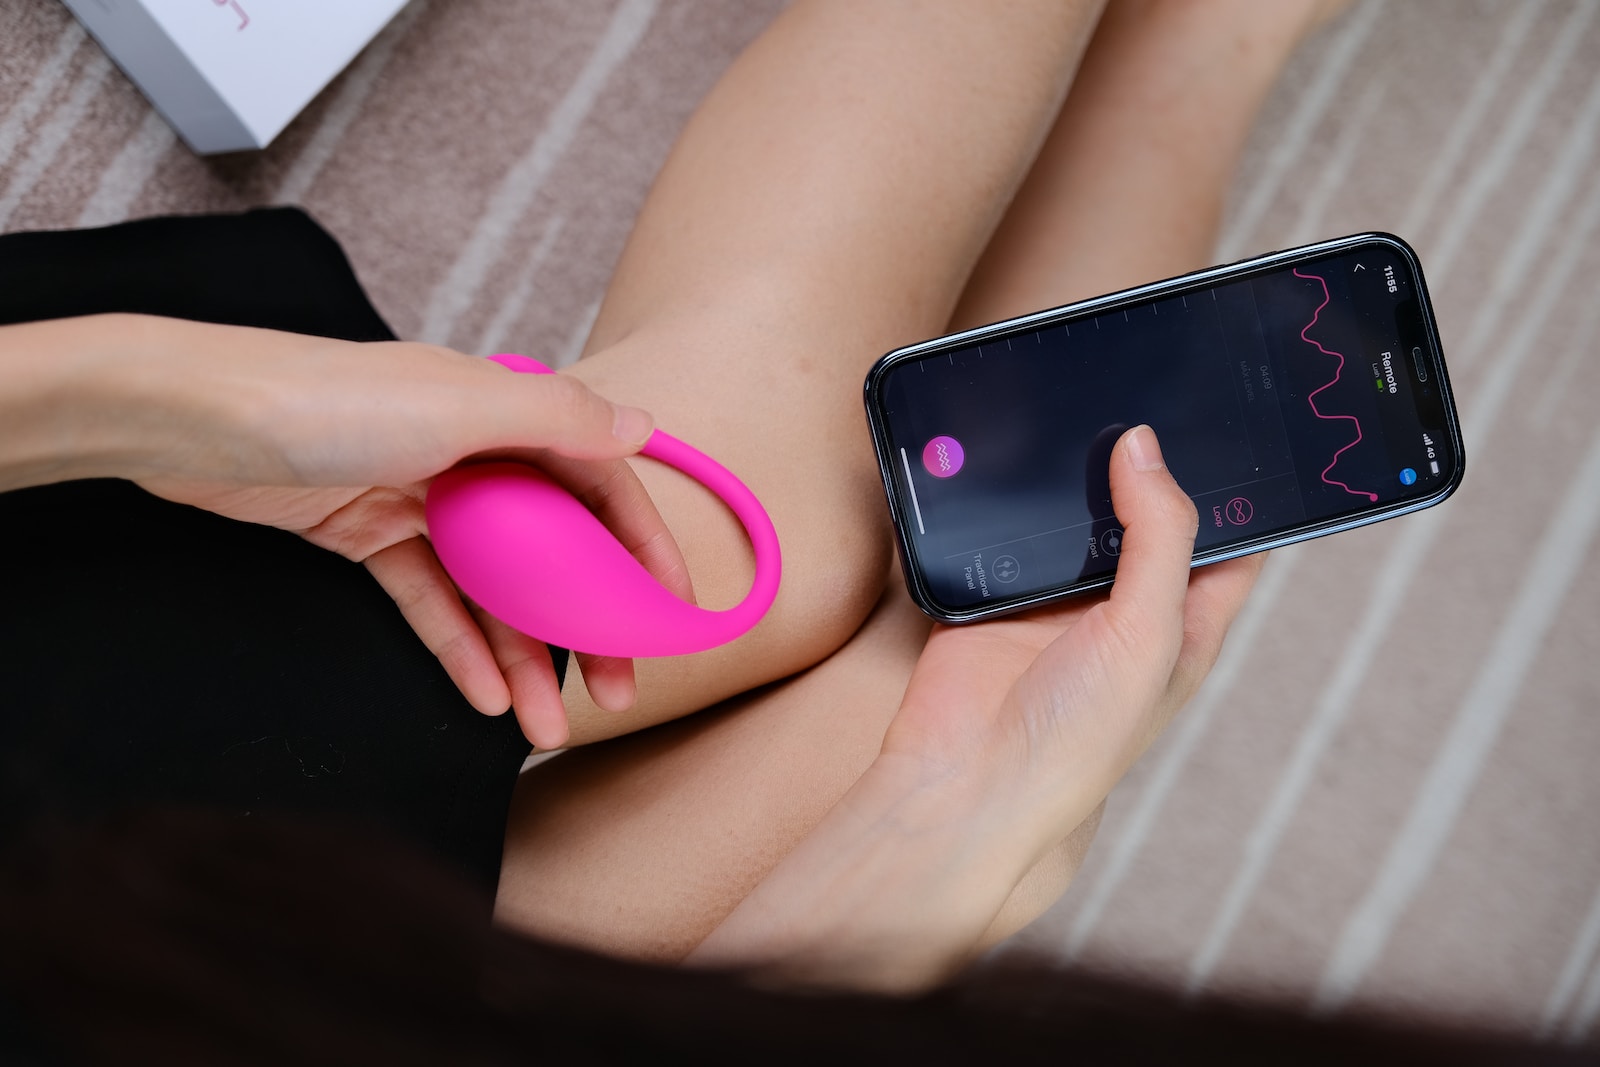 a woman holding a cell phone and a pink object